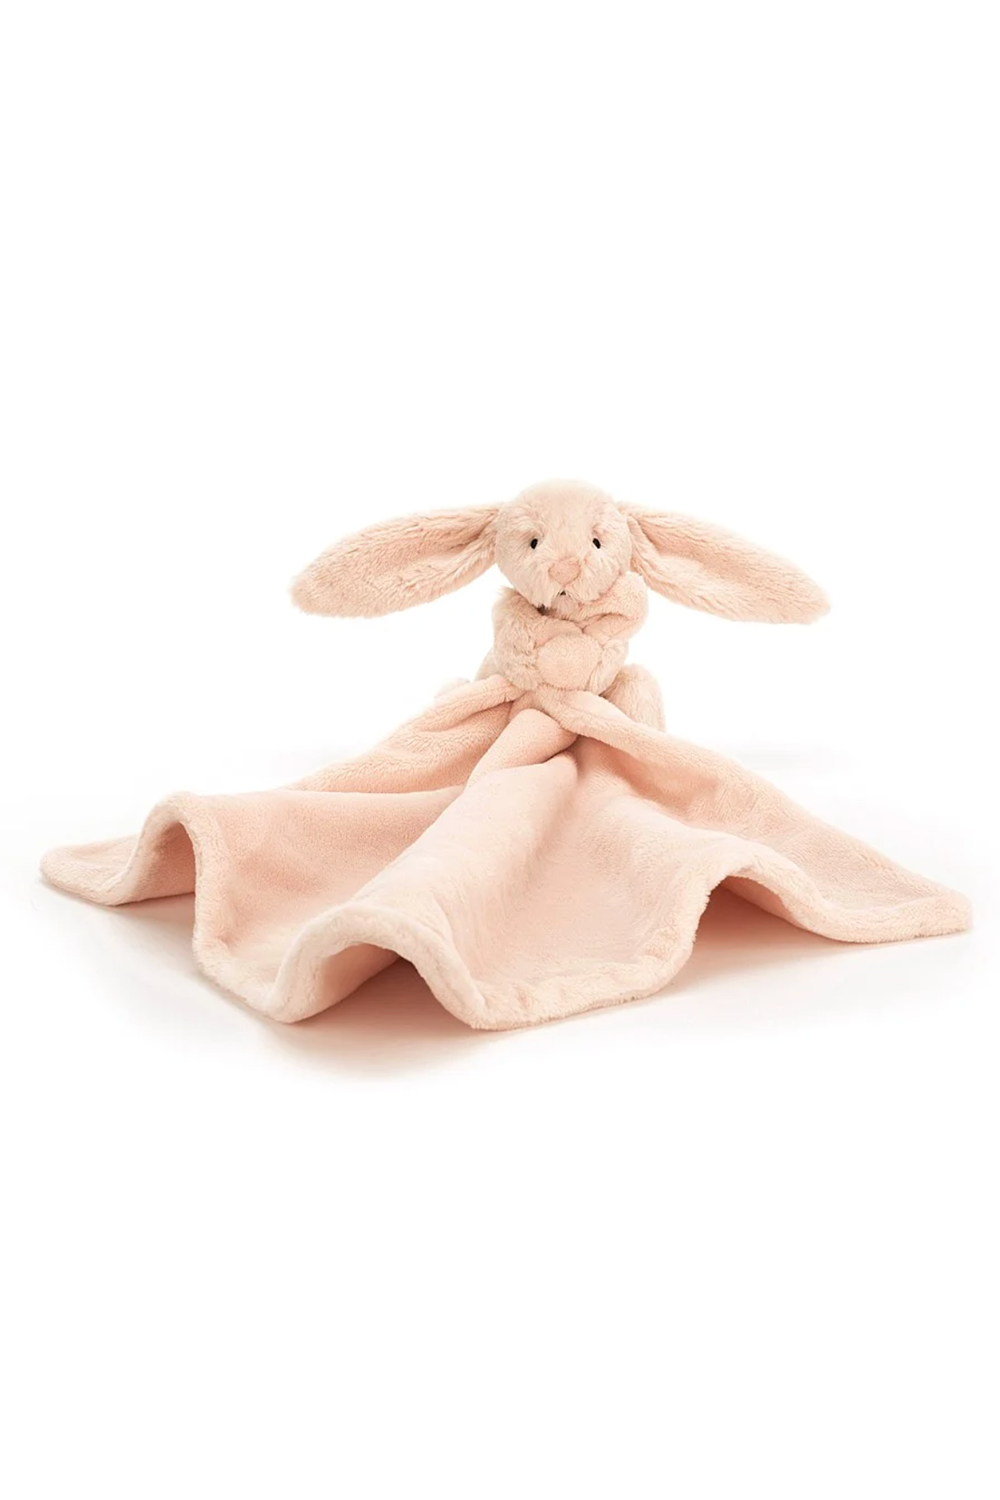 JELLYCAT Bashful Soother - Blush Bunny